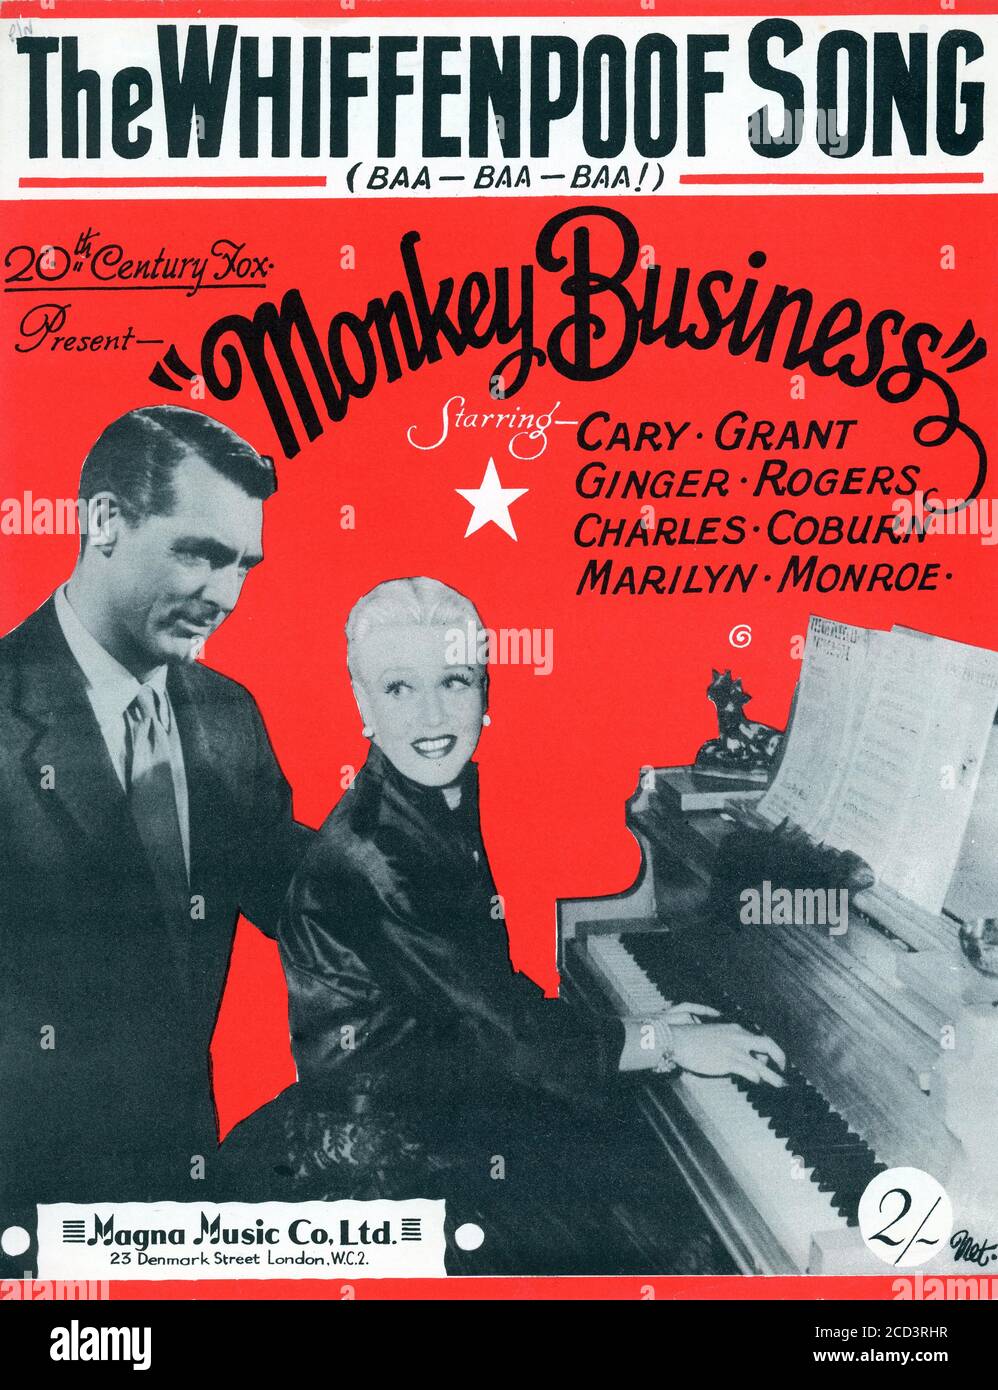 Sheet Music - The Whiffenpoof Song - from Monkey Business - 1952 Stock Photo